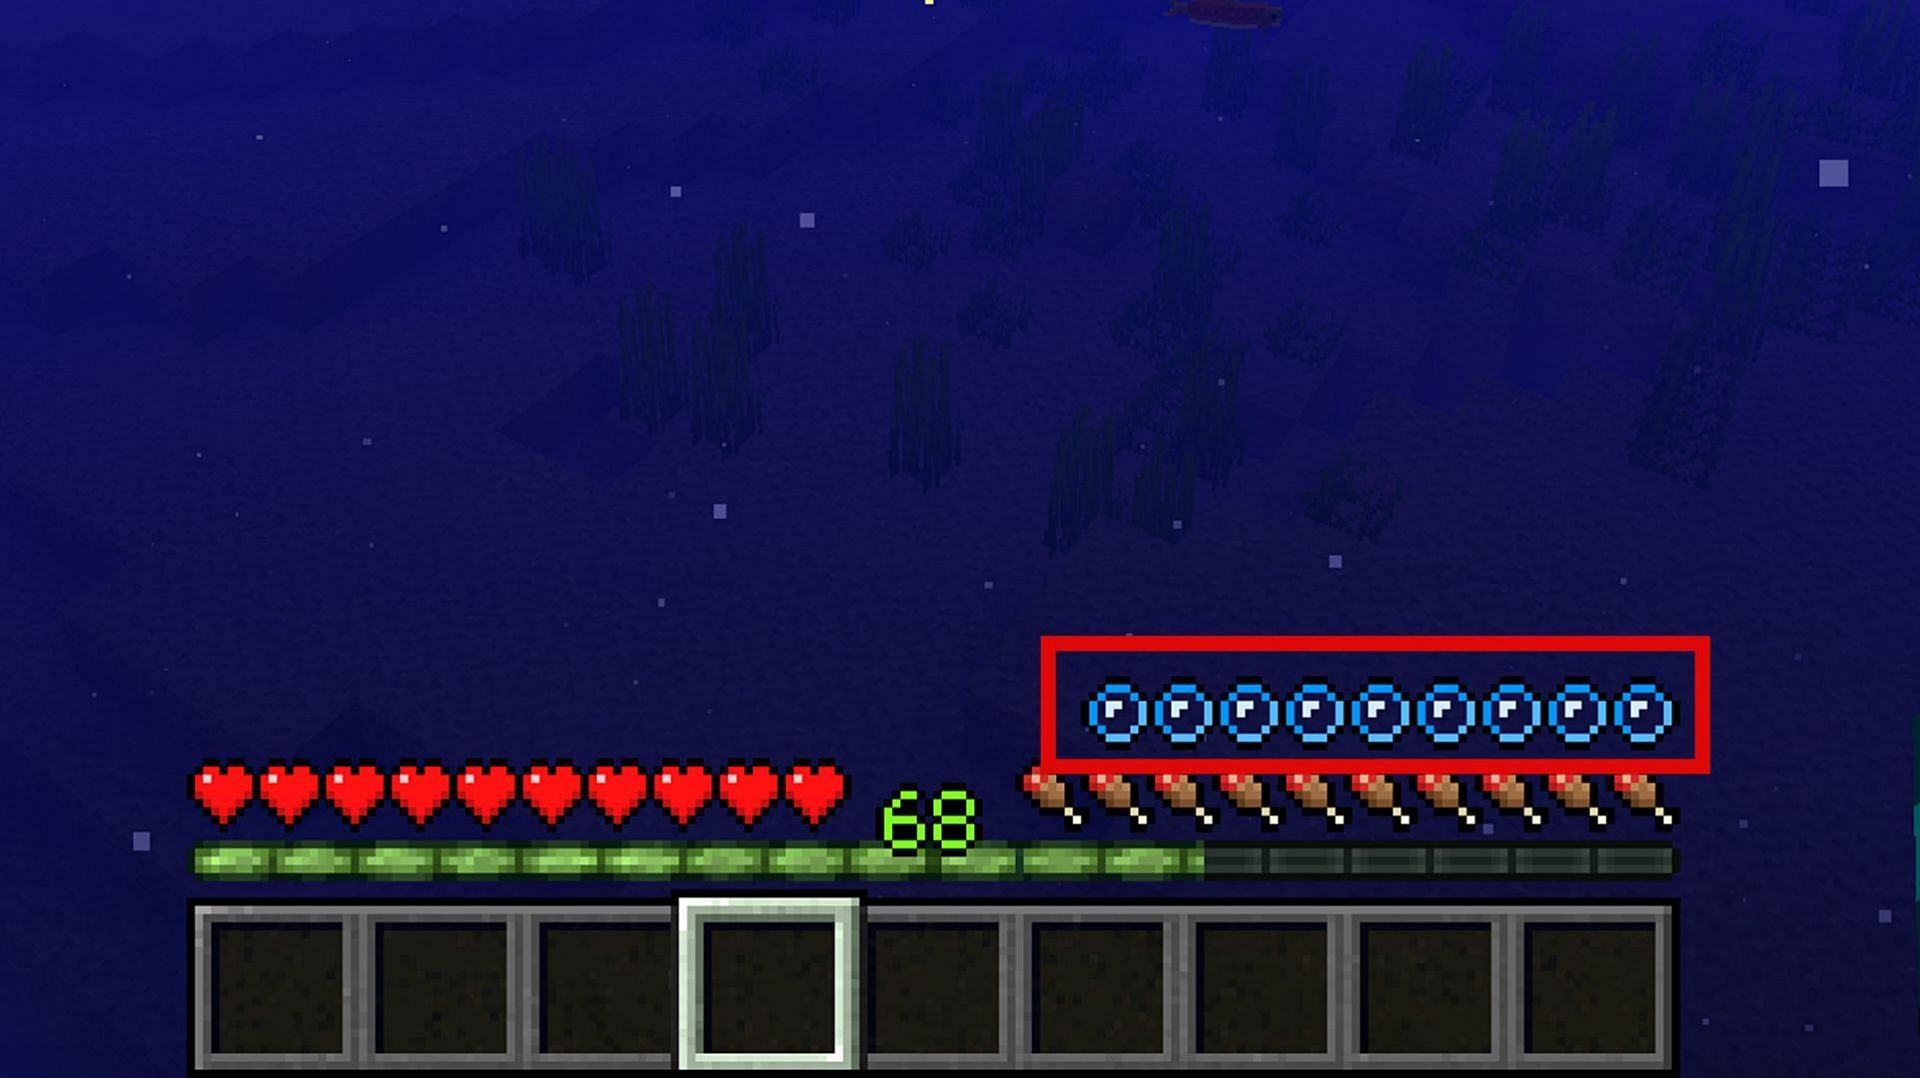 Bubble bar showing breathing time left underwater (Image via Mojang)